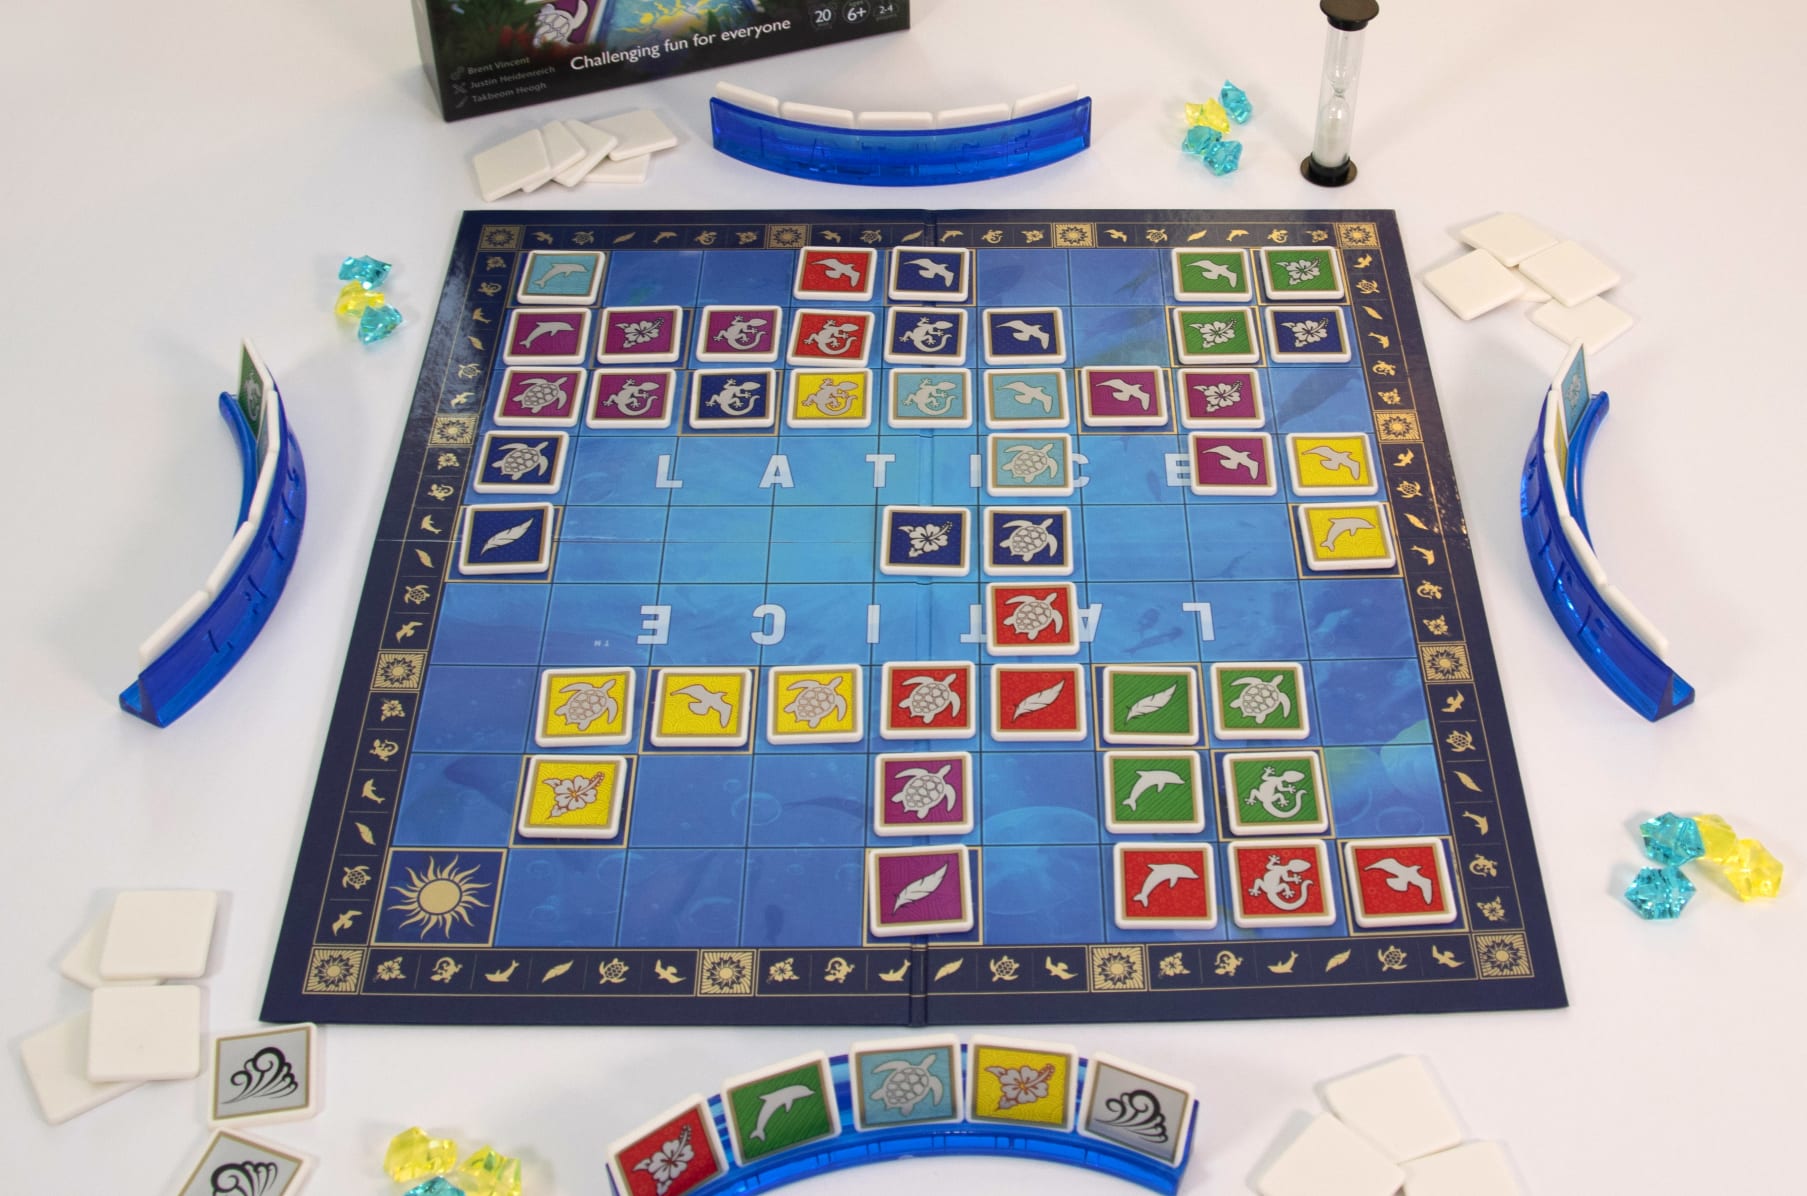 Latice Hawaii Strategy Board Game - The Multi-Award-Winning Smart New Family  Board Game For 2 Players, Intelligent Fun for Creative People. 